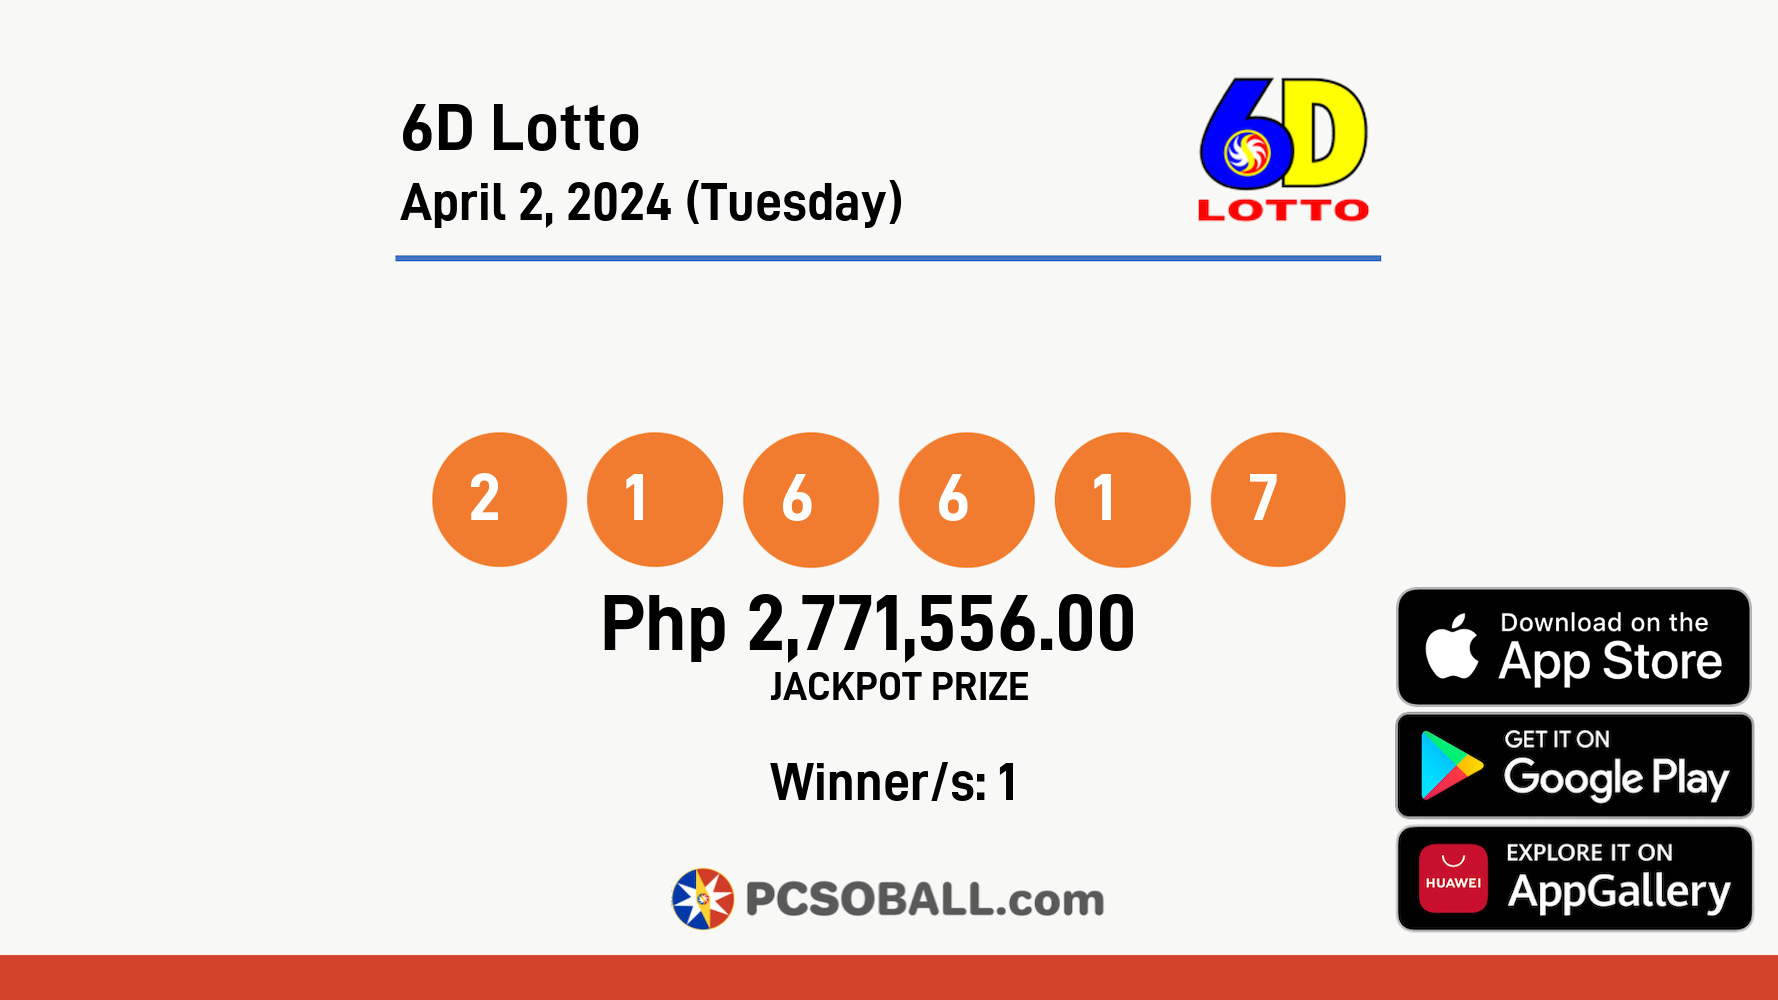 6D Lotto April 2, 2024 (Tuesday) Result